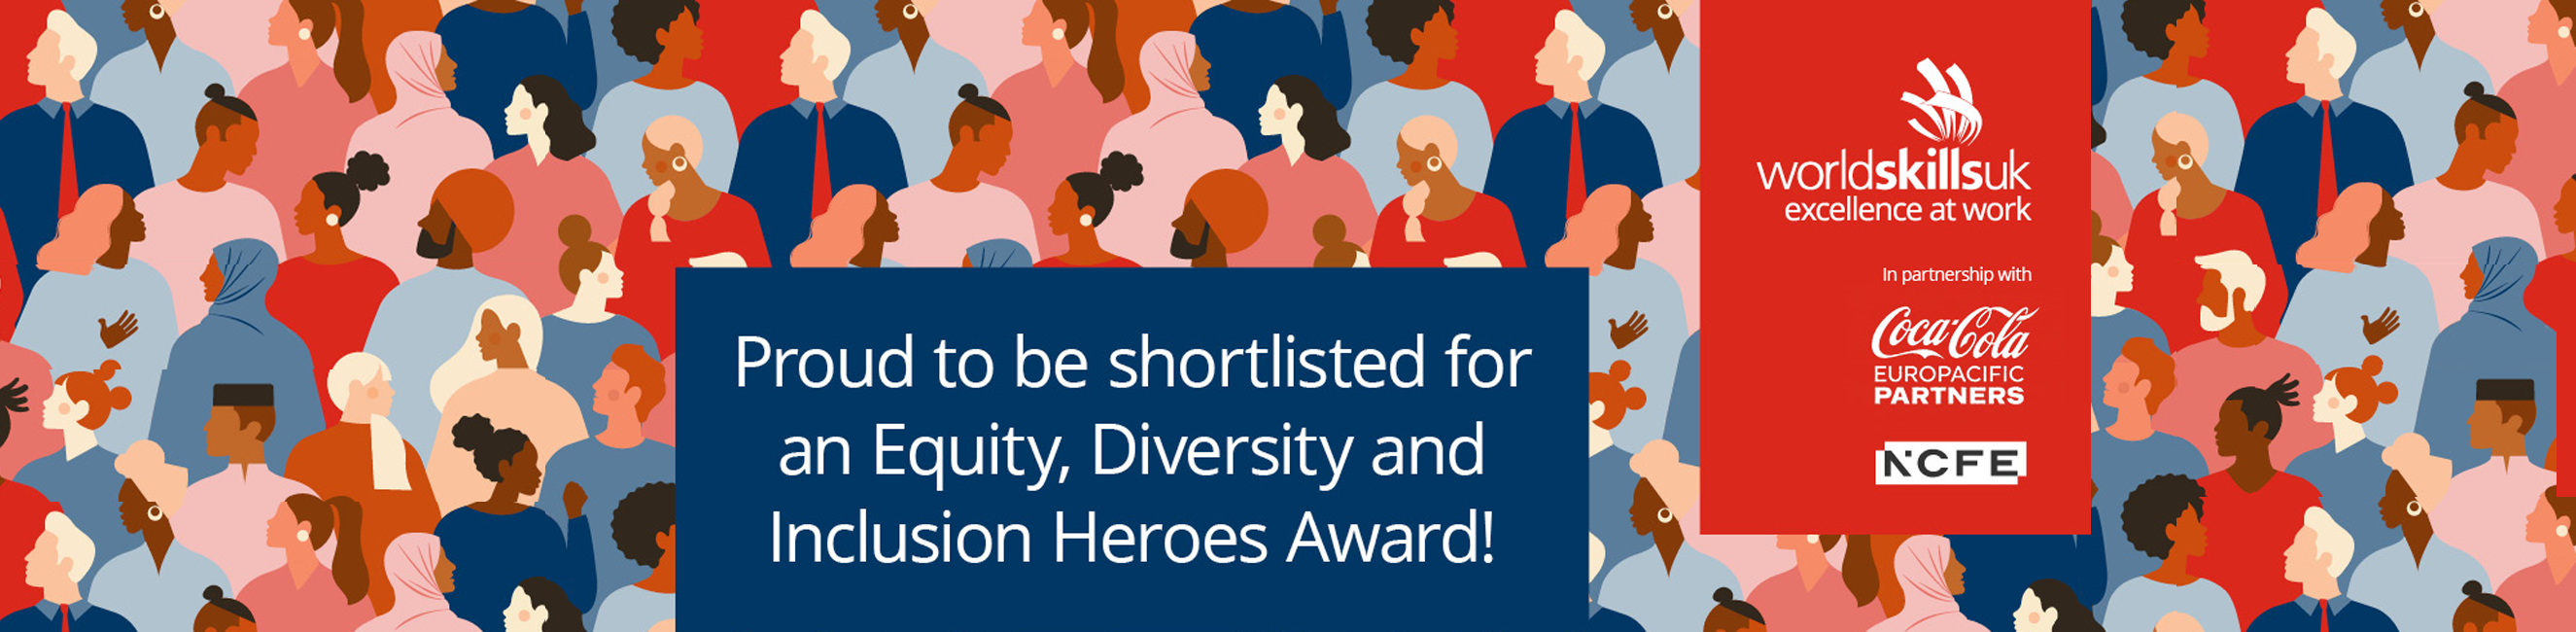 WorldSkills Award - Equity, Diversity and Inclusion Hero